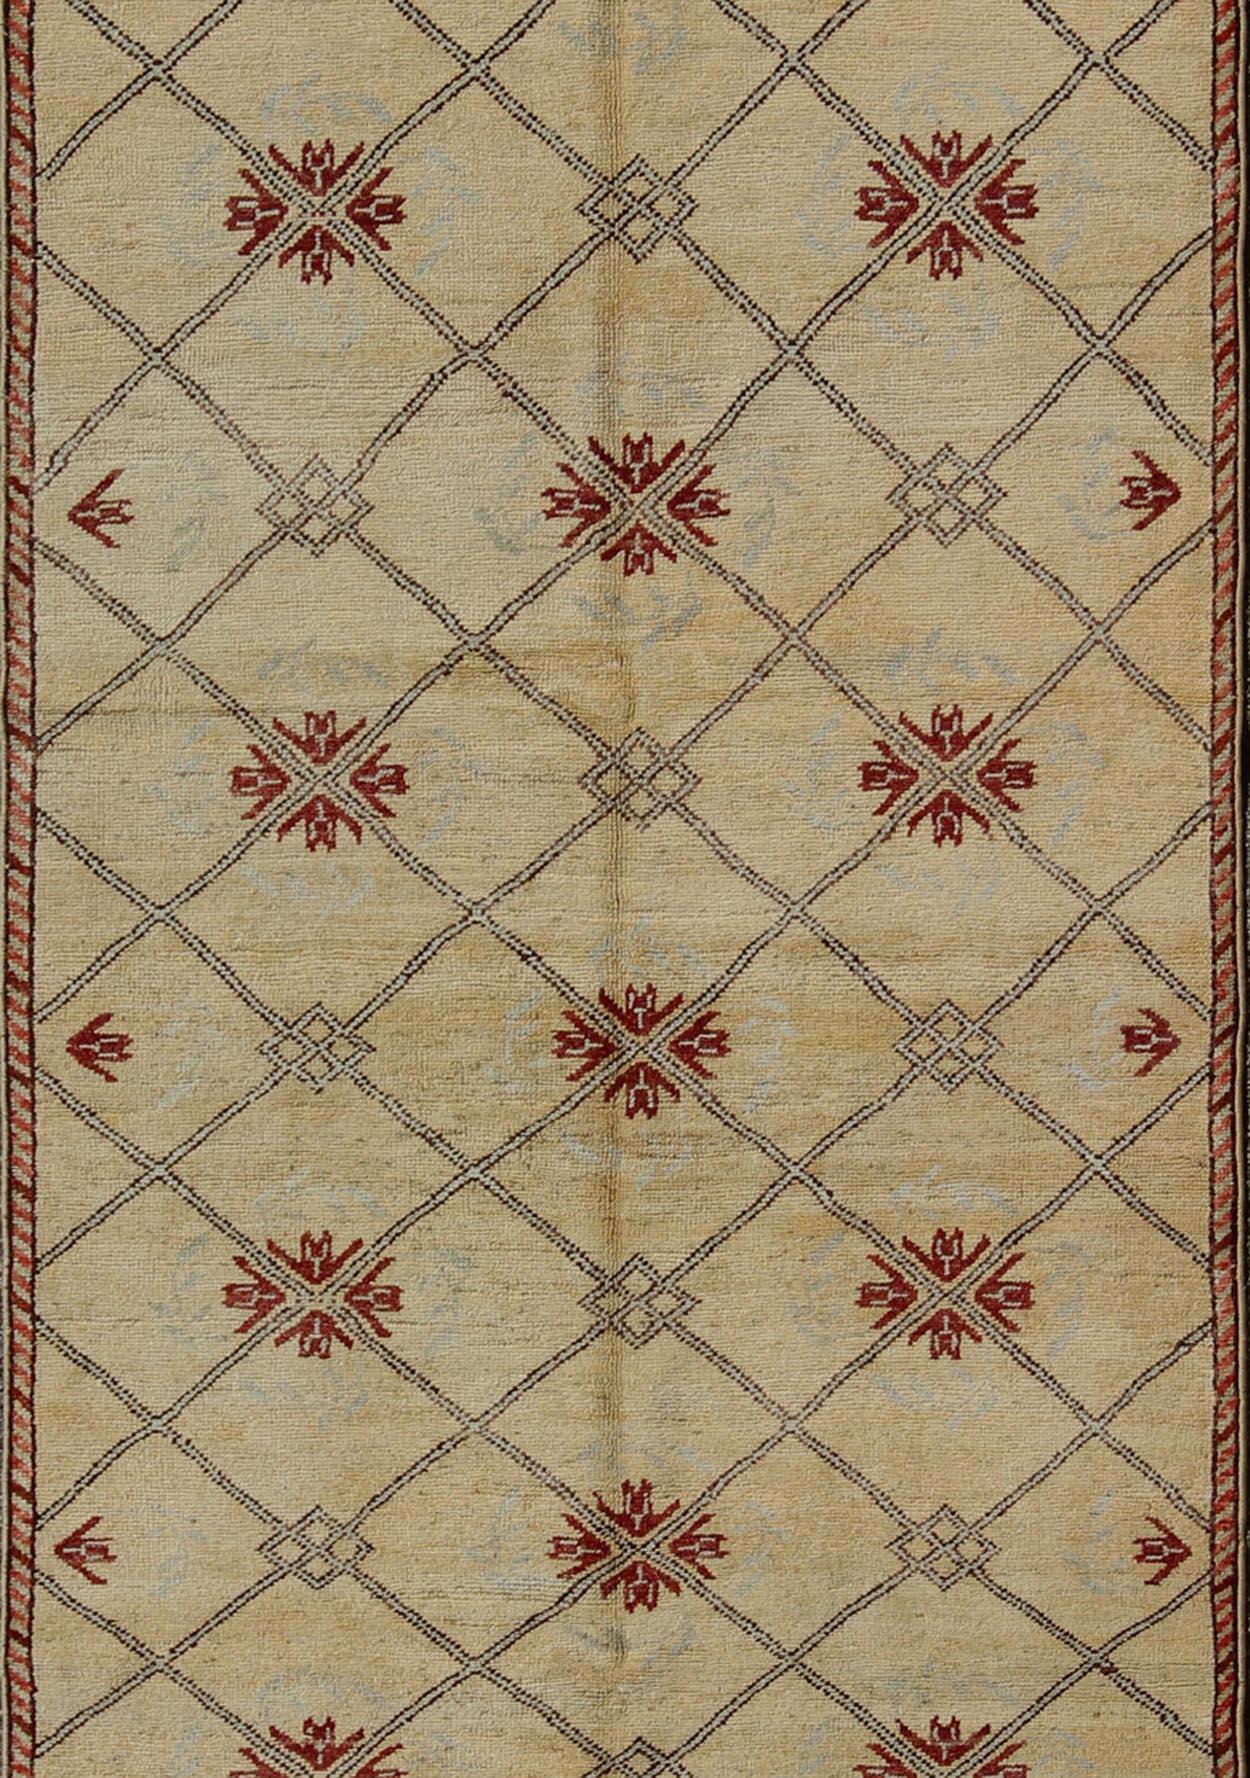 Vintage Turkish Cross-Hatch Trellis Design Oushak Rug by Keivan Woven Arts

Measures: 4'2 x 9'7

This 1940's Turkish Oushak features a cross hatch design with sub-geometric motifs in the crossings. The field is rendered in a creamy yellow, with